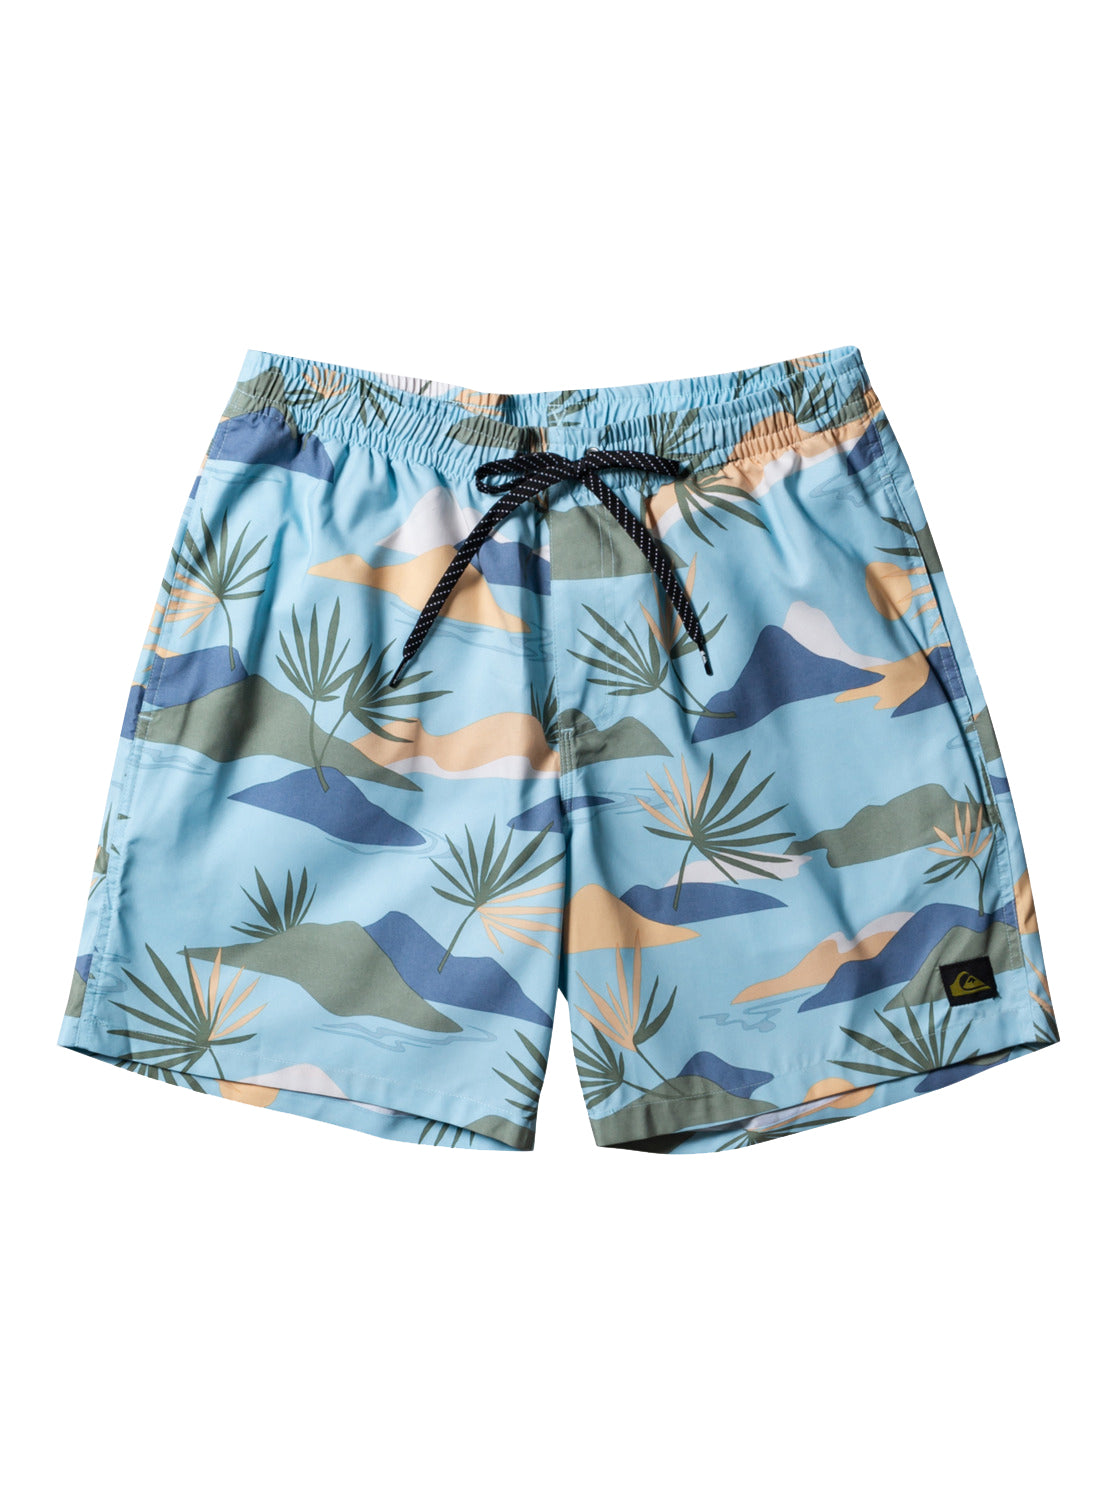 Quiksilver Everyday Jam Mixed Volley 17" Shorts BGC7 S